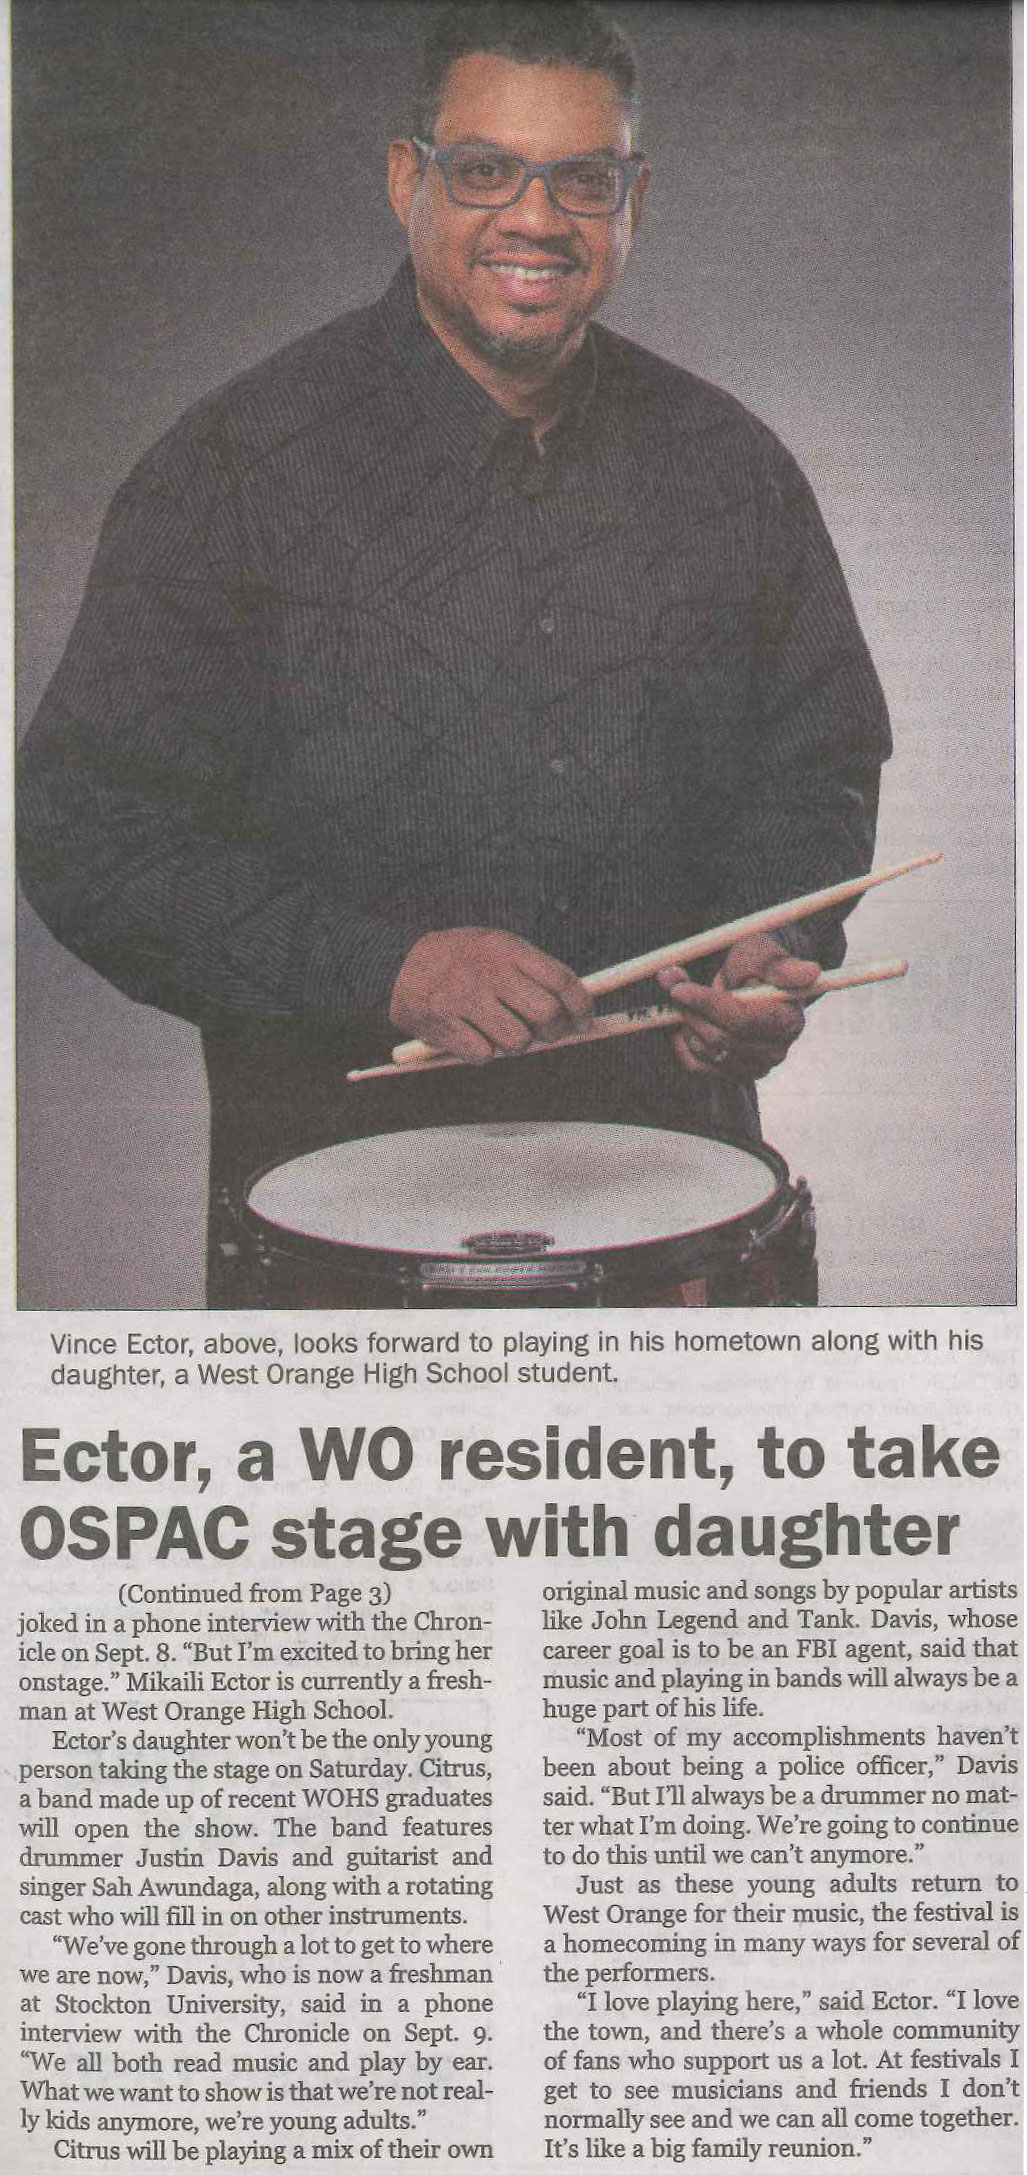 Ector, a WO resident, to take OSPAC stage with daughter